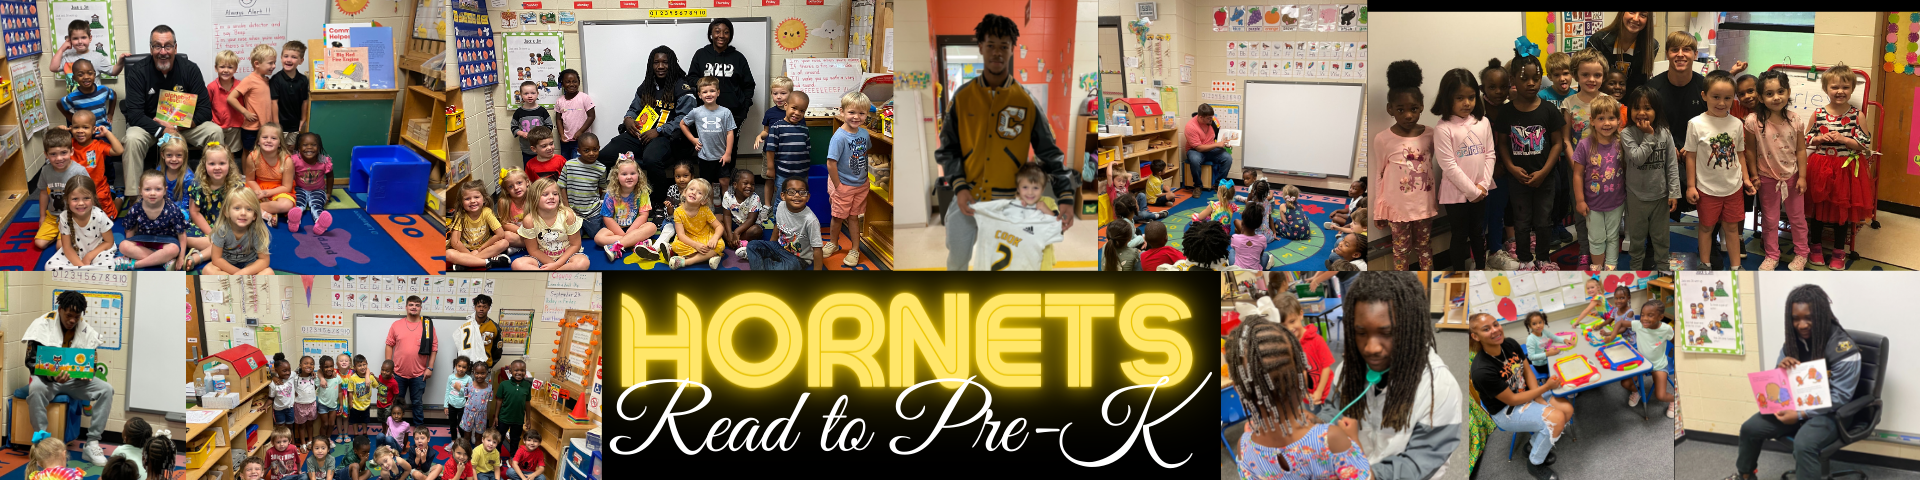 hornets read to pre-k